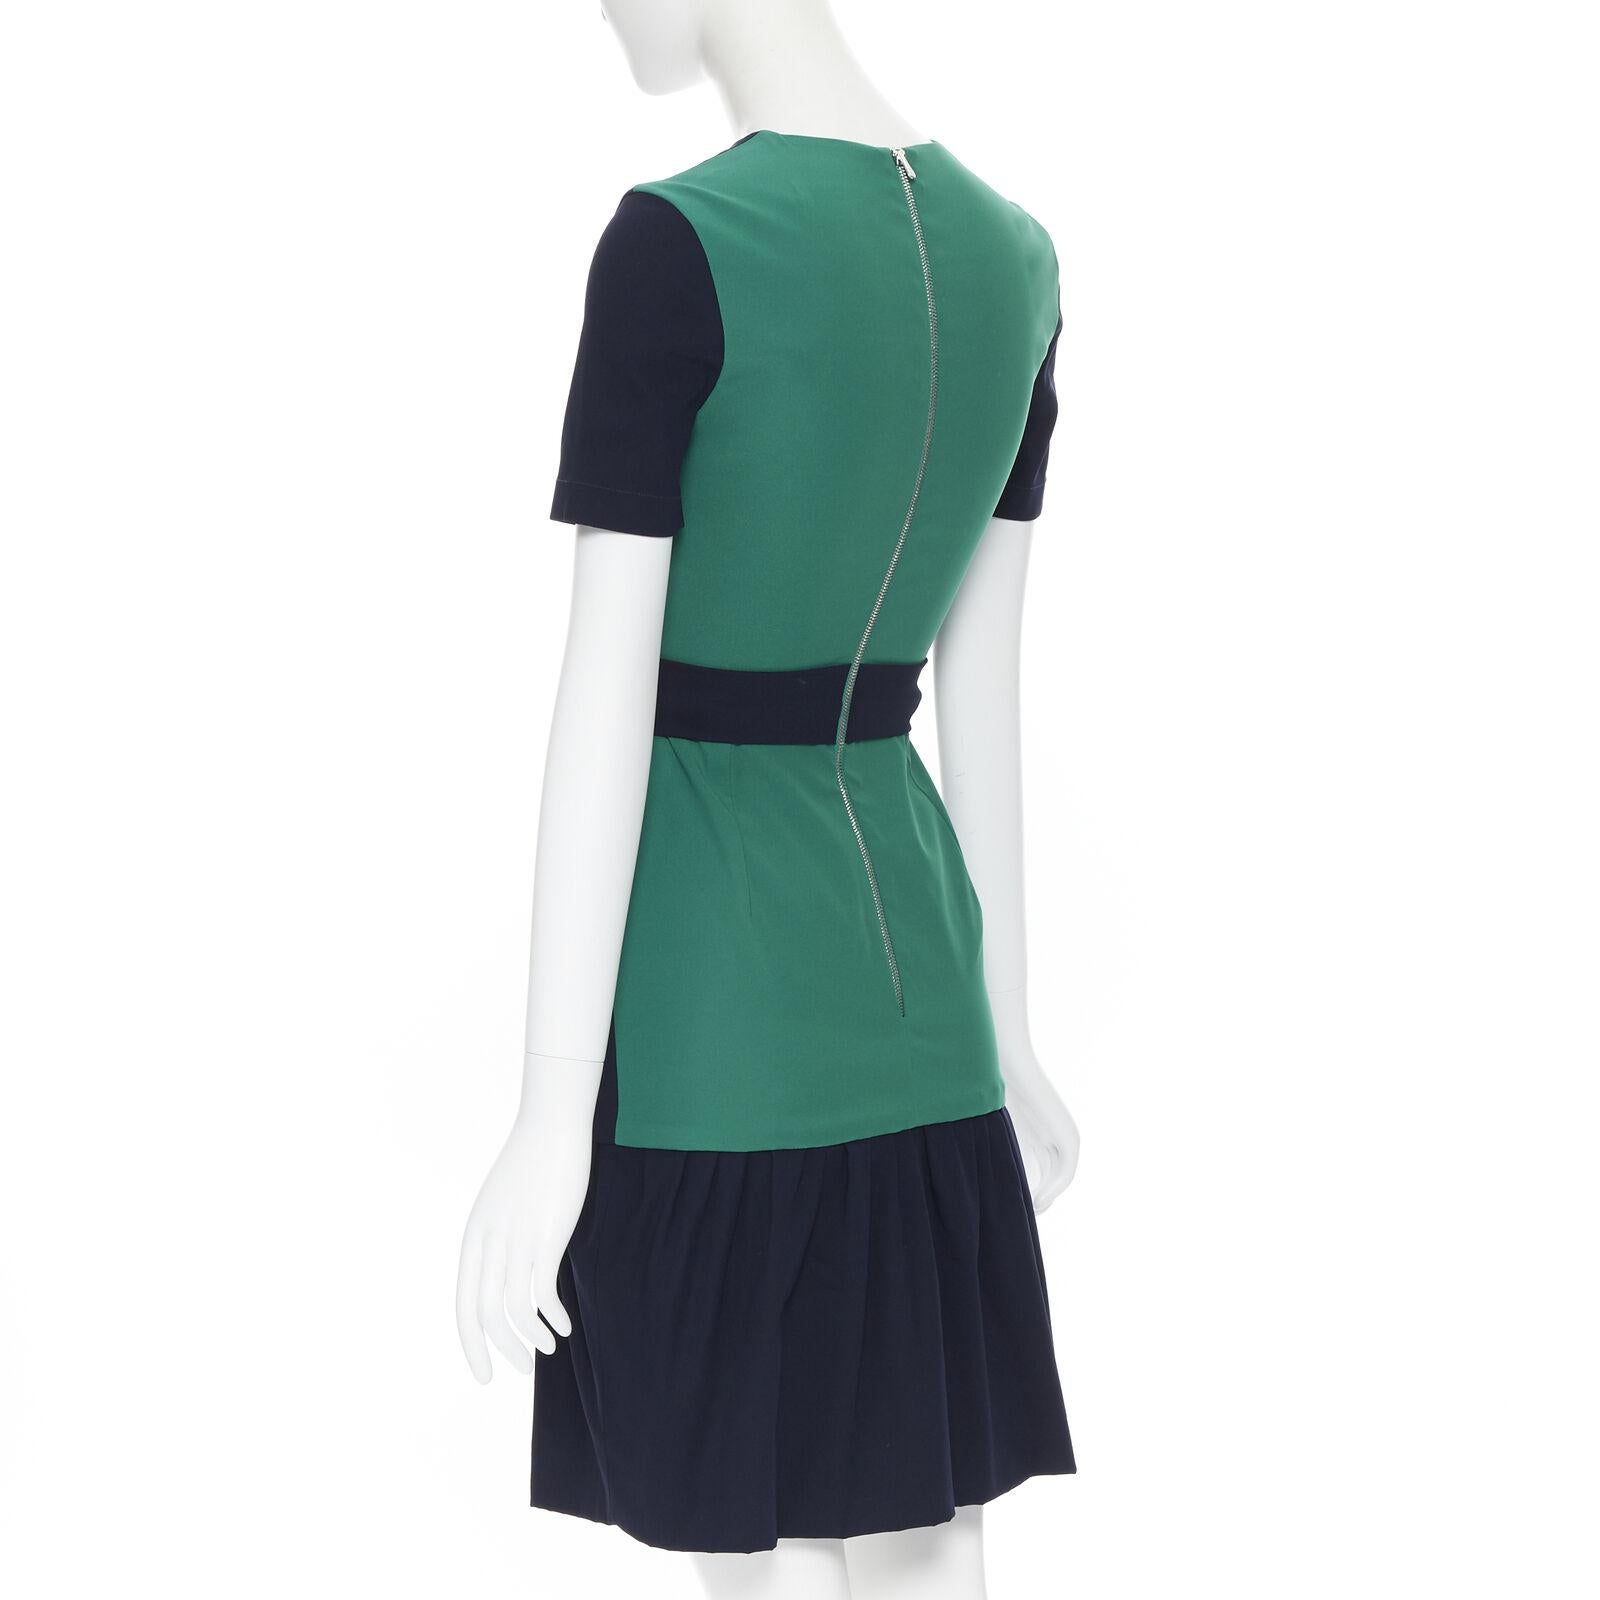 PREEN THORNTON BREGAZZI navy blue green colorblocked back cocktail dress XS
Reference: SNKO/A00041
Brand: Preen
Designer: Thornton Bregazzi
Model: Cocktail dress
Material: Viscose, Blend
Color: Navy, Green
Pattern: Solid
Closure: Zip
Extra Details: